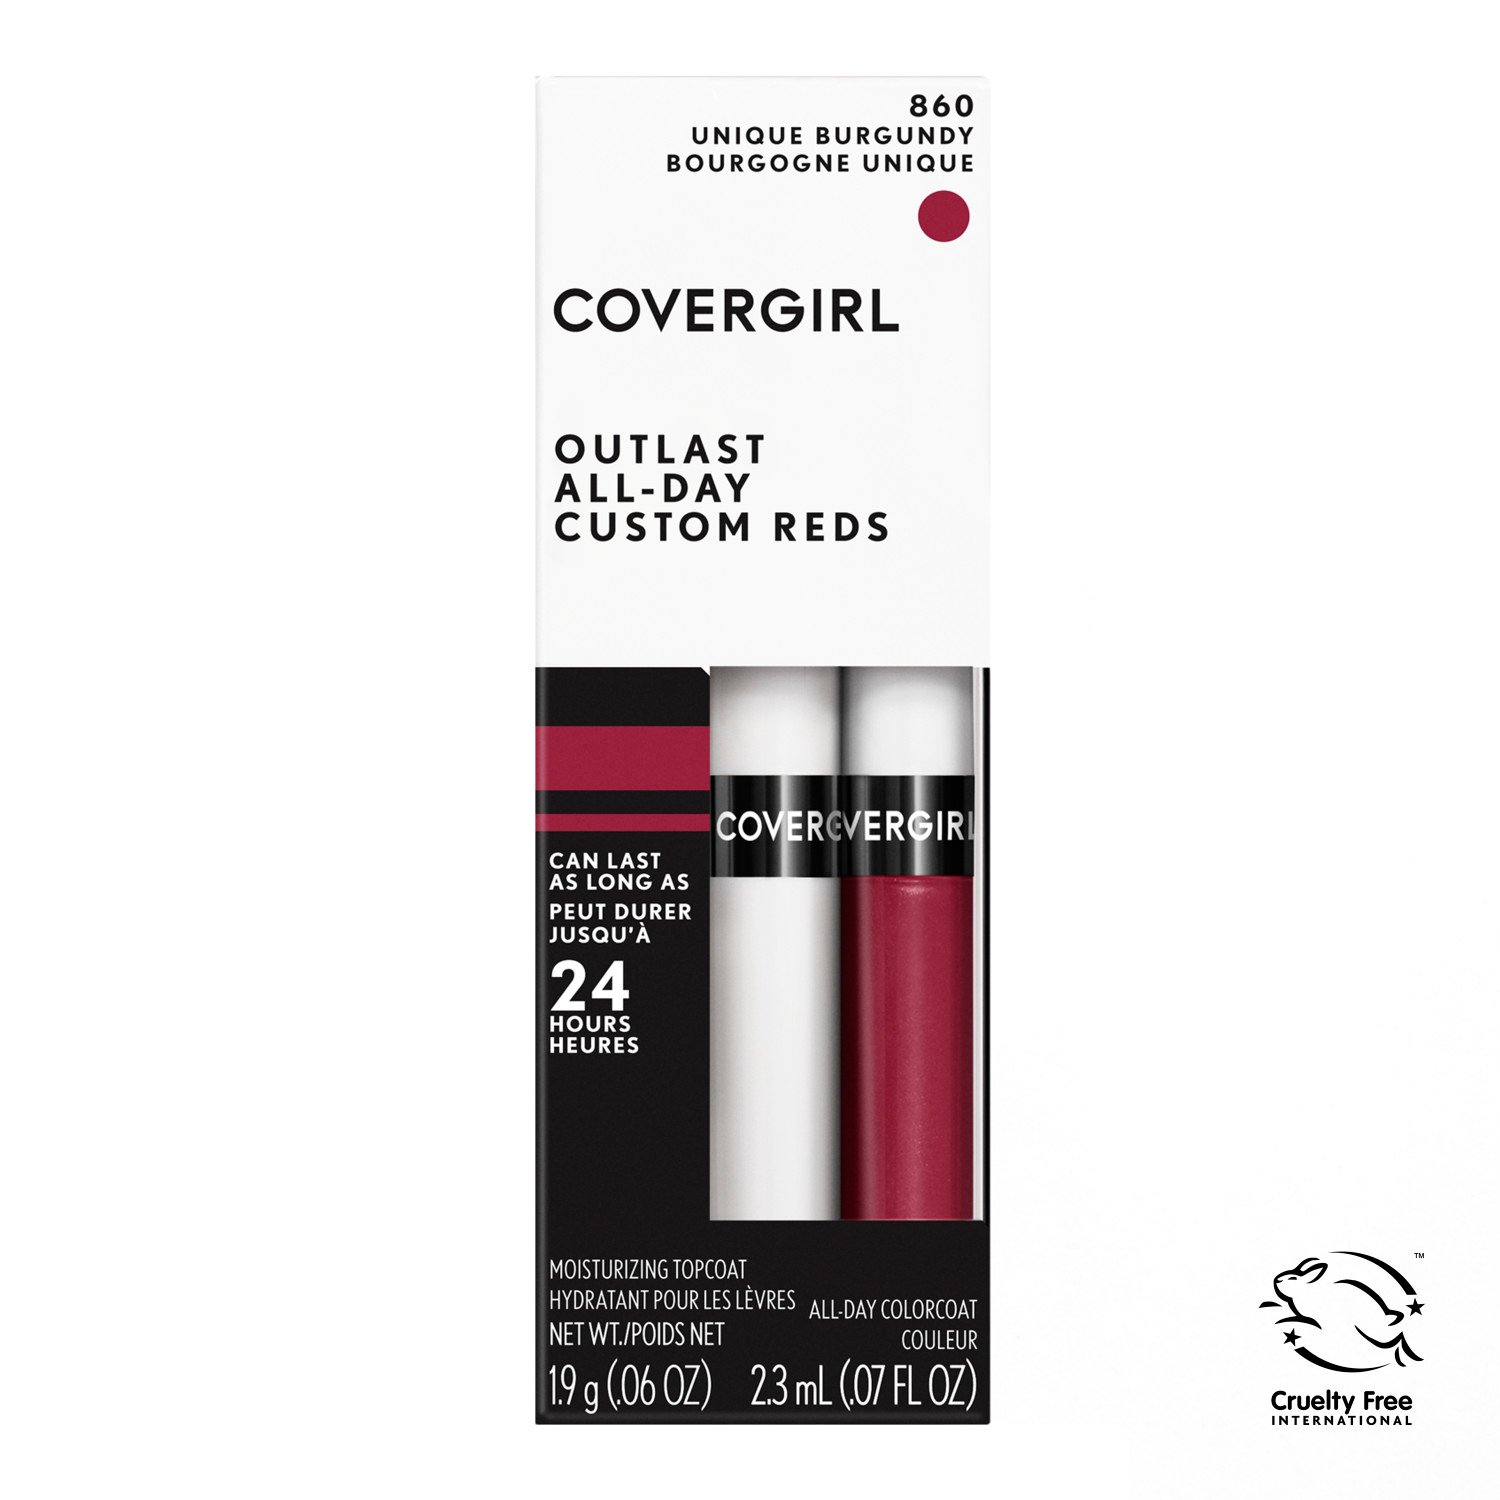 Covergirl Outlast All-Day Lipcolor 860 Unique Burgundy